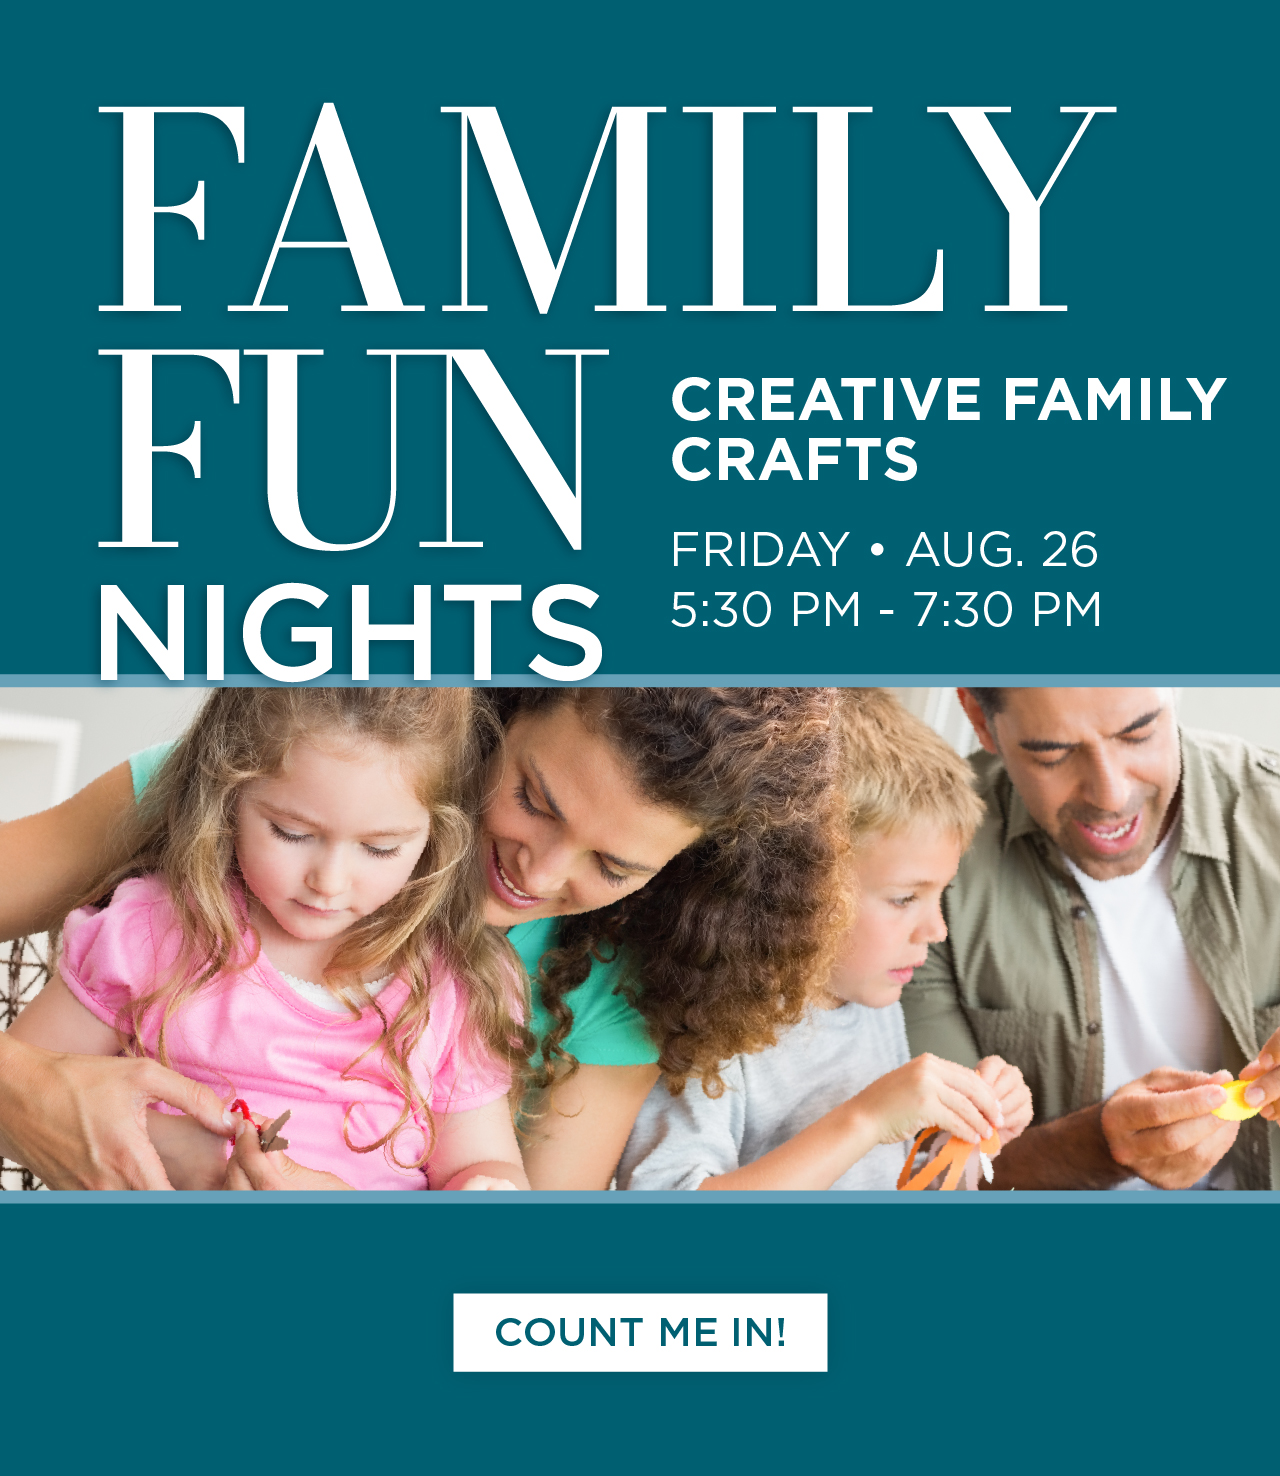 Get Crafty With Family Fun Crafts